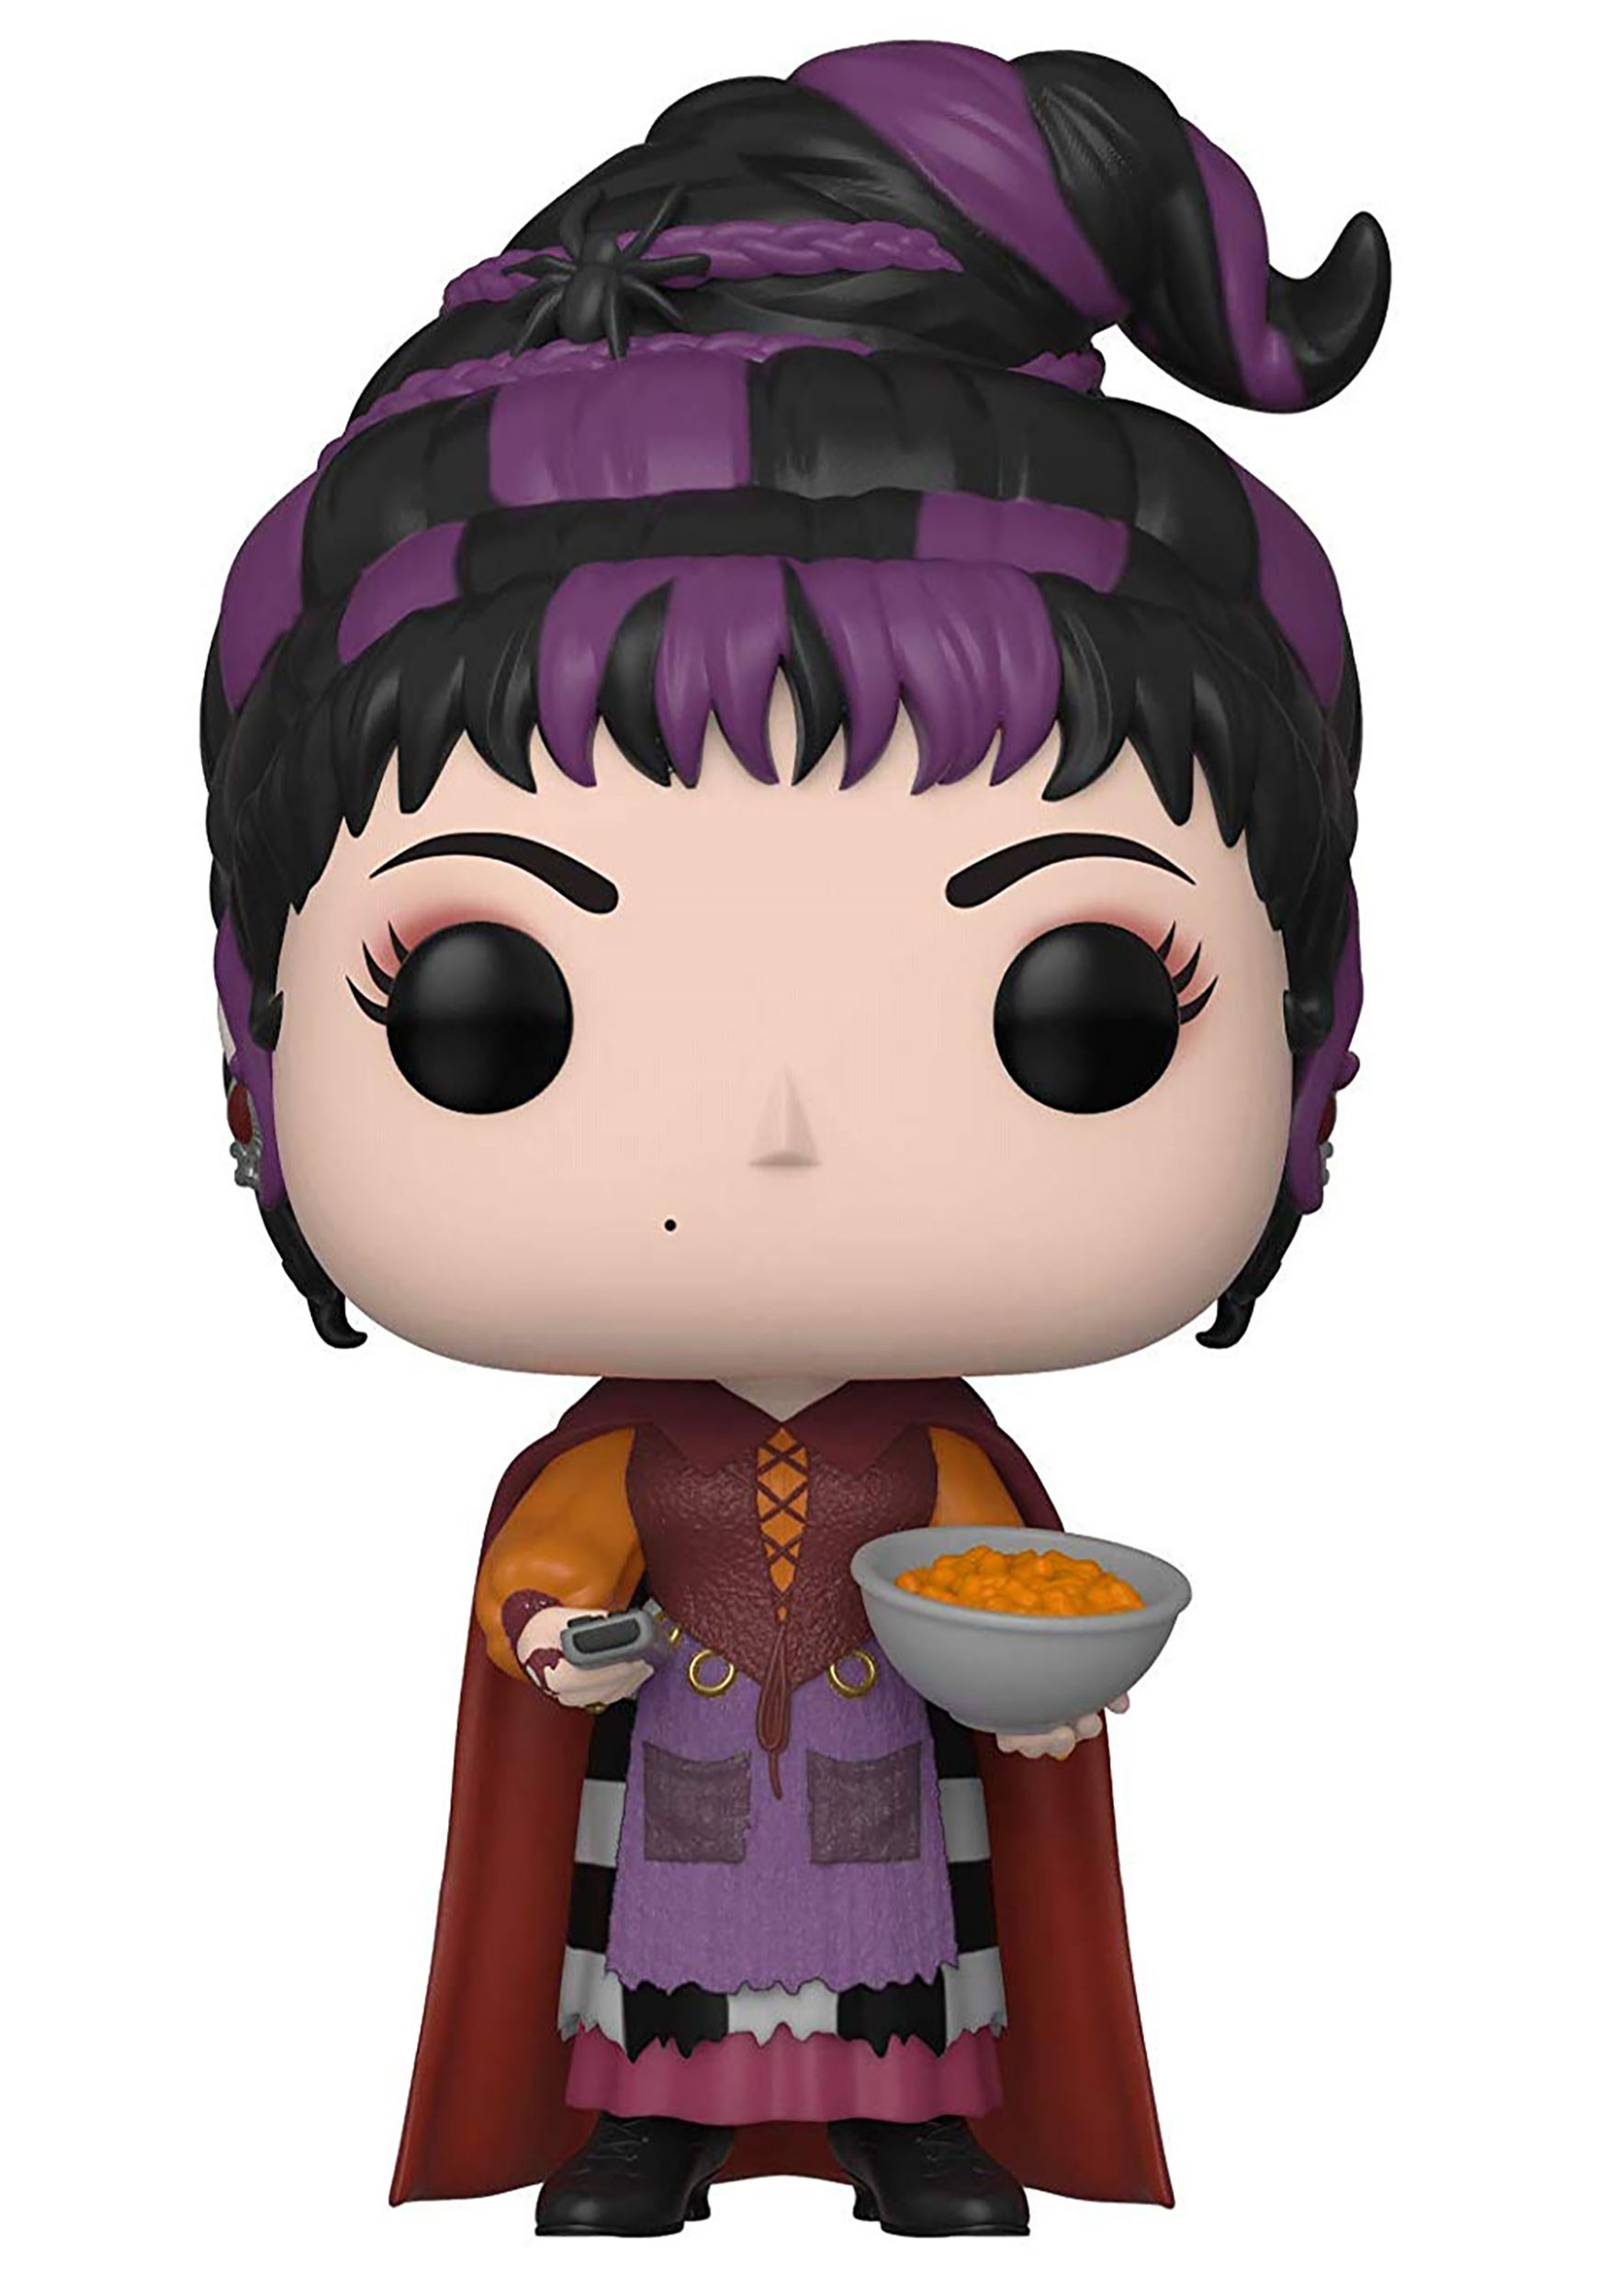 Funko POP! Disney: Hocus Pocus - Mary With Cheese Puffs